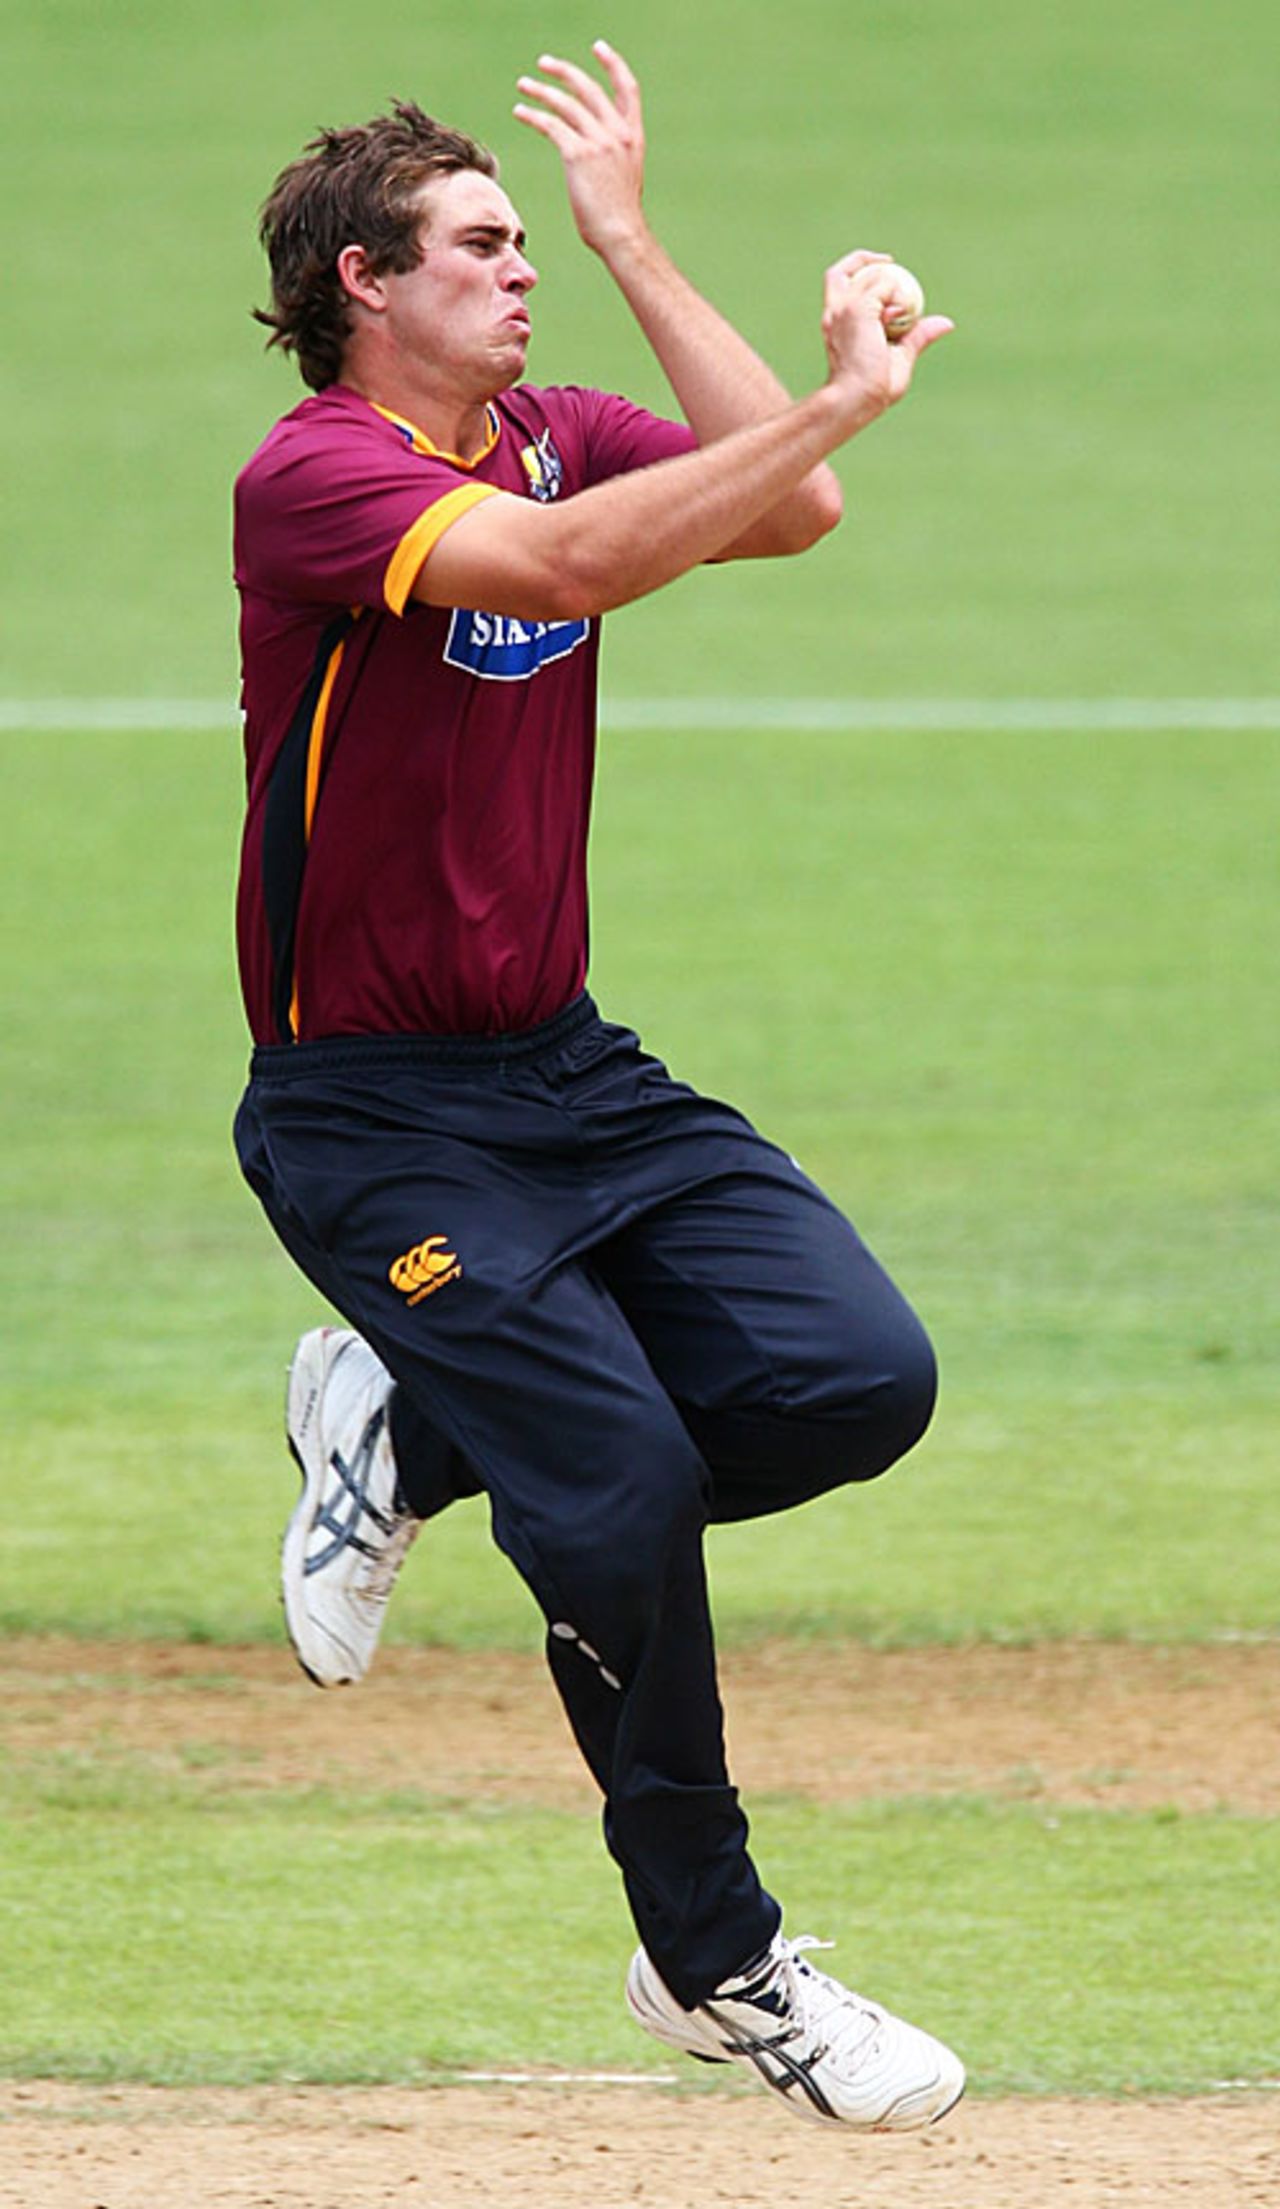 Tim Southee gets ready to deliver, Auckland v Northern Districts, State Shield, Eden Park Outer Oval, January 21, 2009